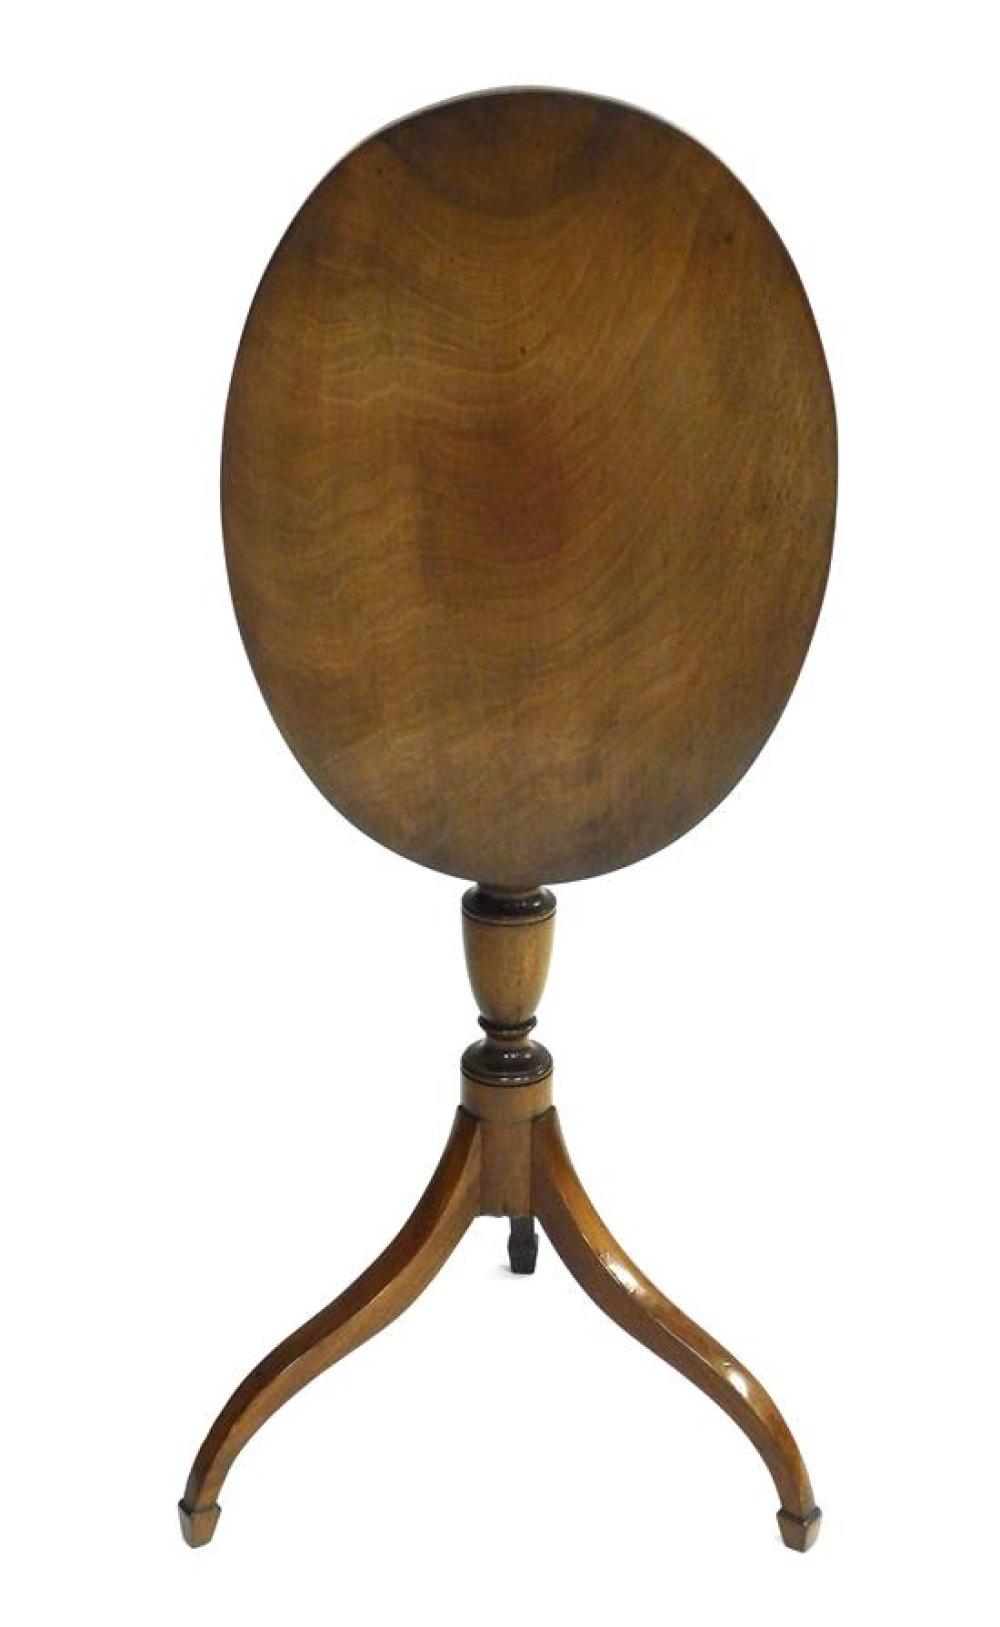 OVAL TILT TOP STAND, LATE 19TH/ EARLY